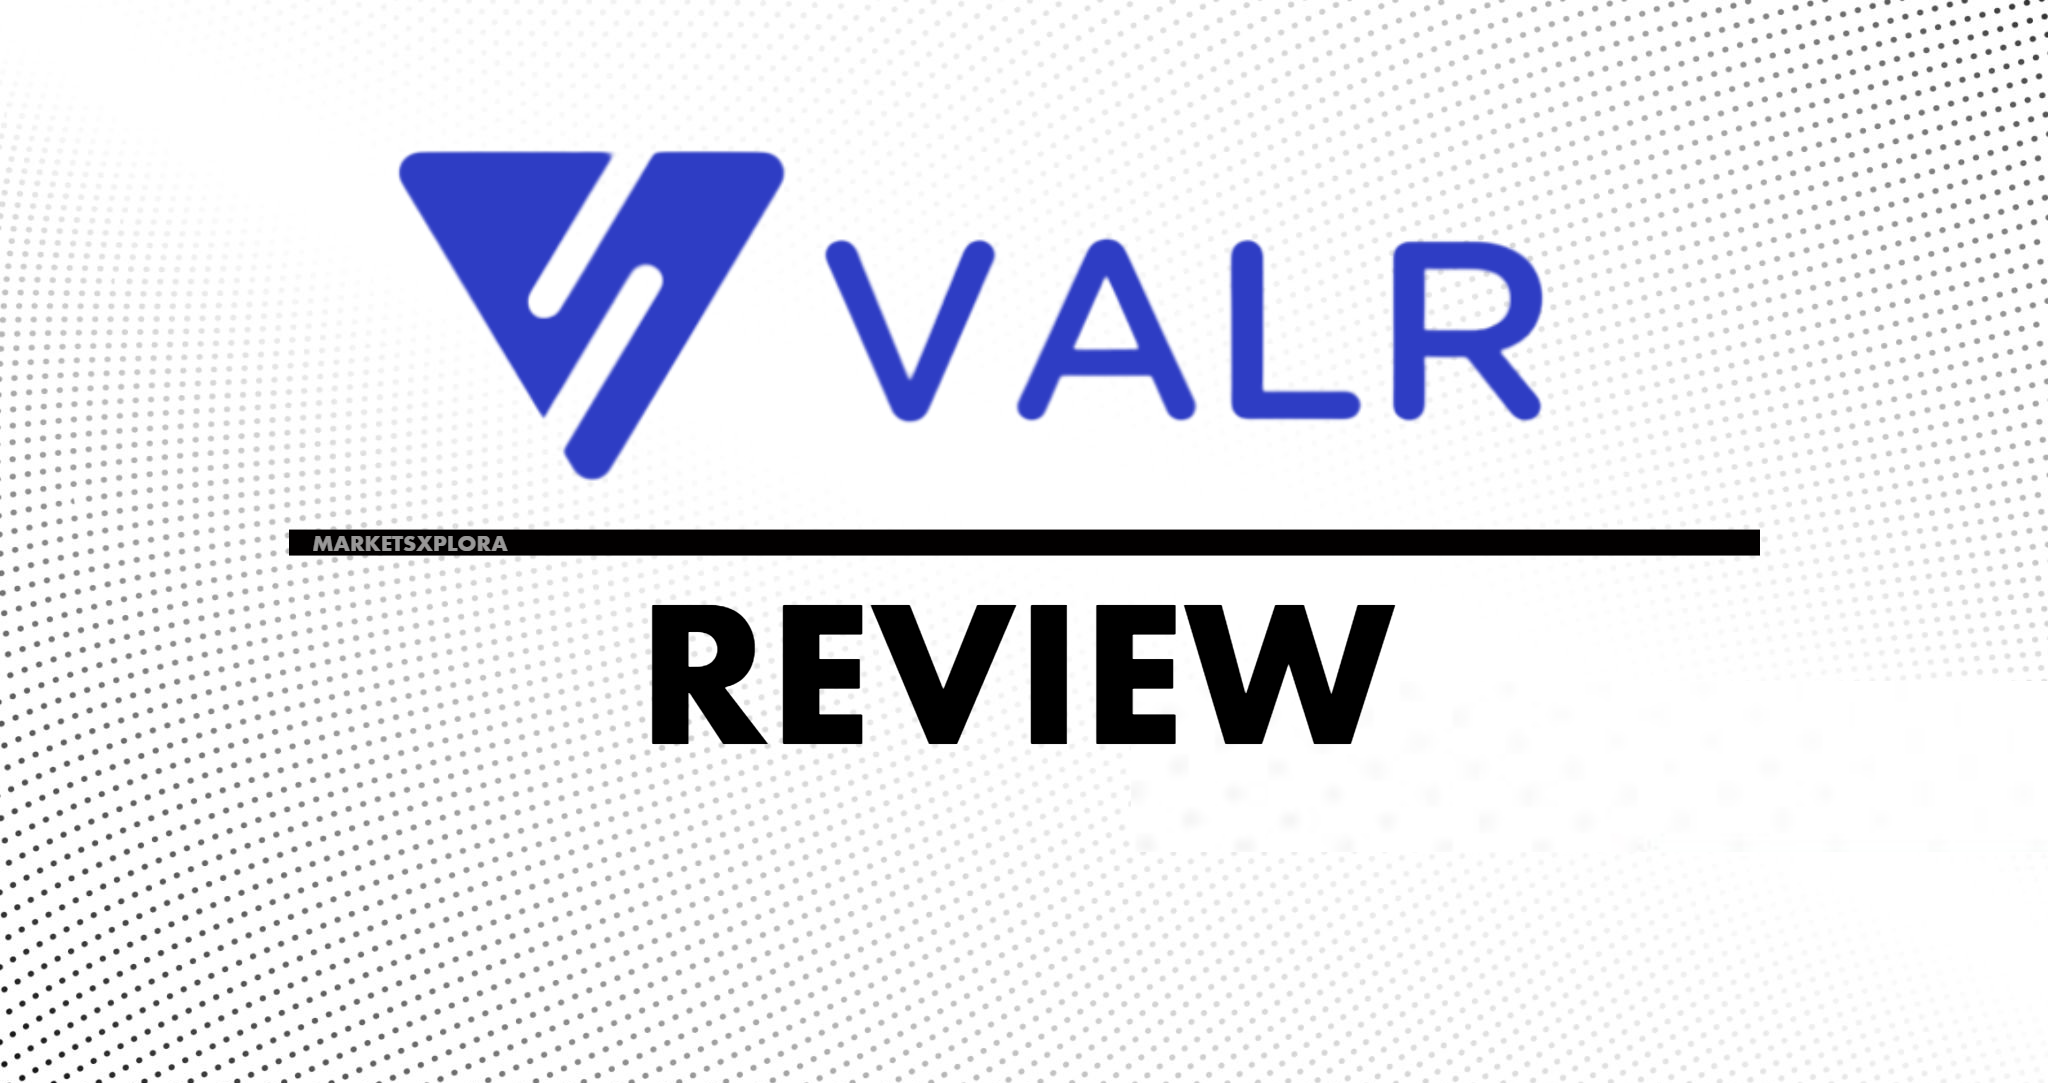 Looking for an in-depth VALR Review? This article provides a thorough analysis of the exchange's regulatory standing, user protections, trading options, fees, and customer support - giving you the insights to decide if VALR is the ideal crypto platform for South African investors.